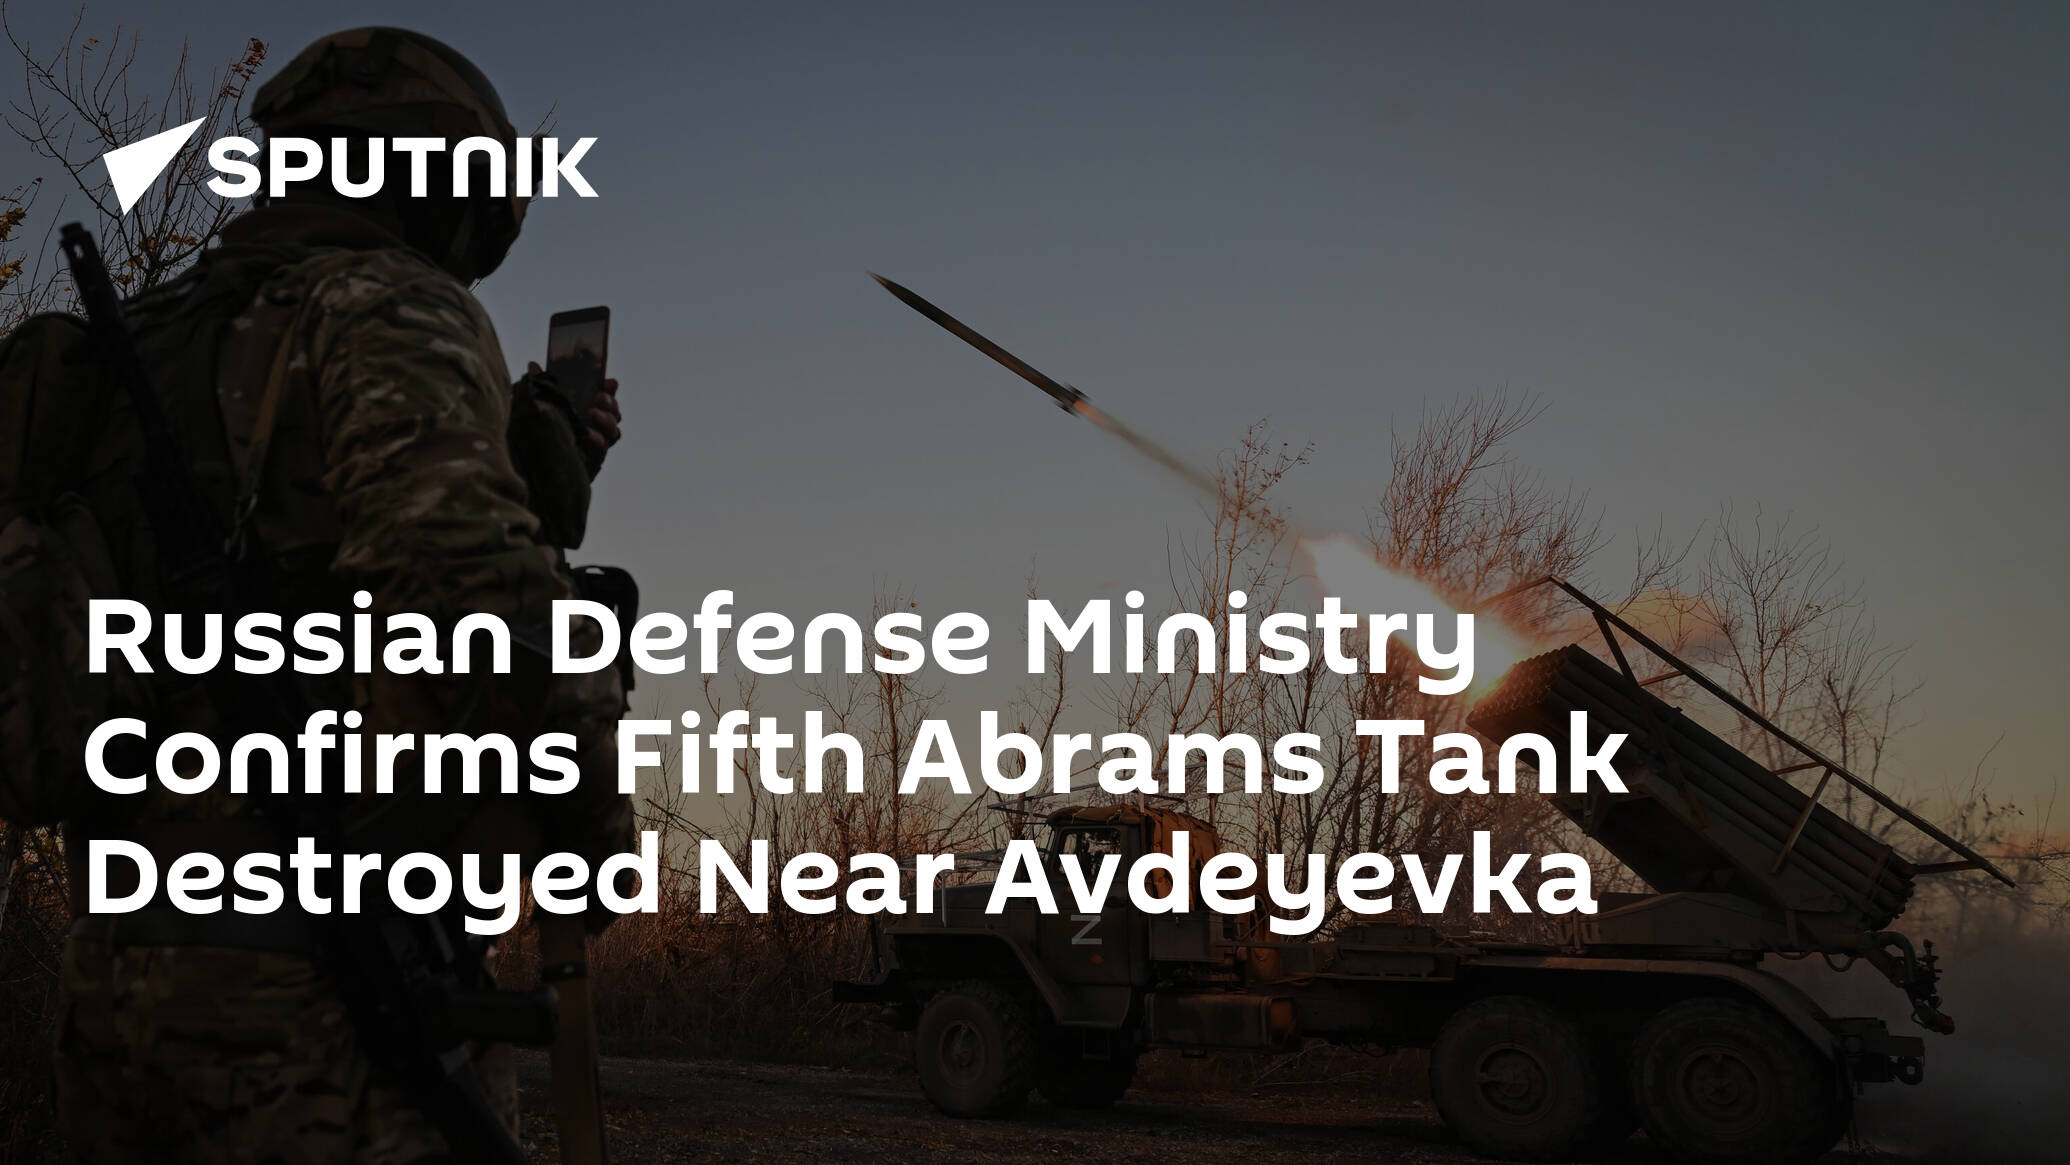 Russian Defense Ministry Confirms Fifth Abrams Tank Destroyed Near Avdeyevka